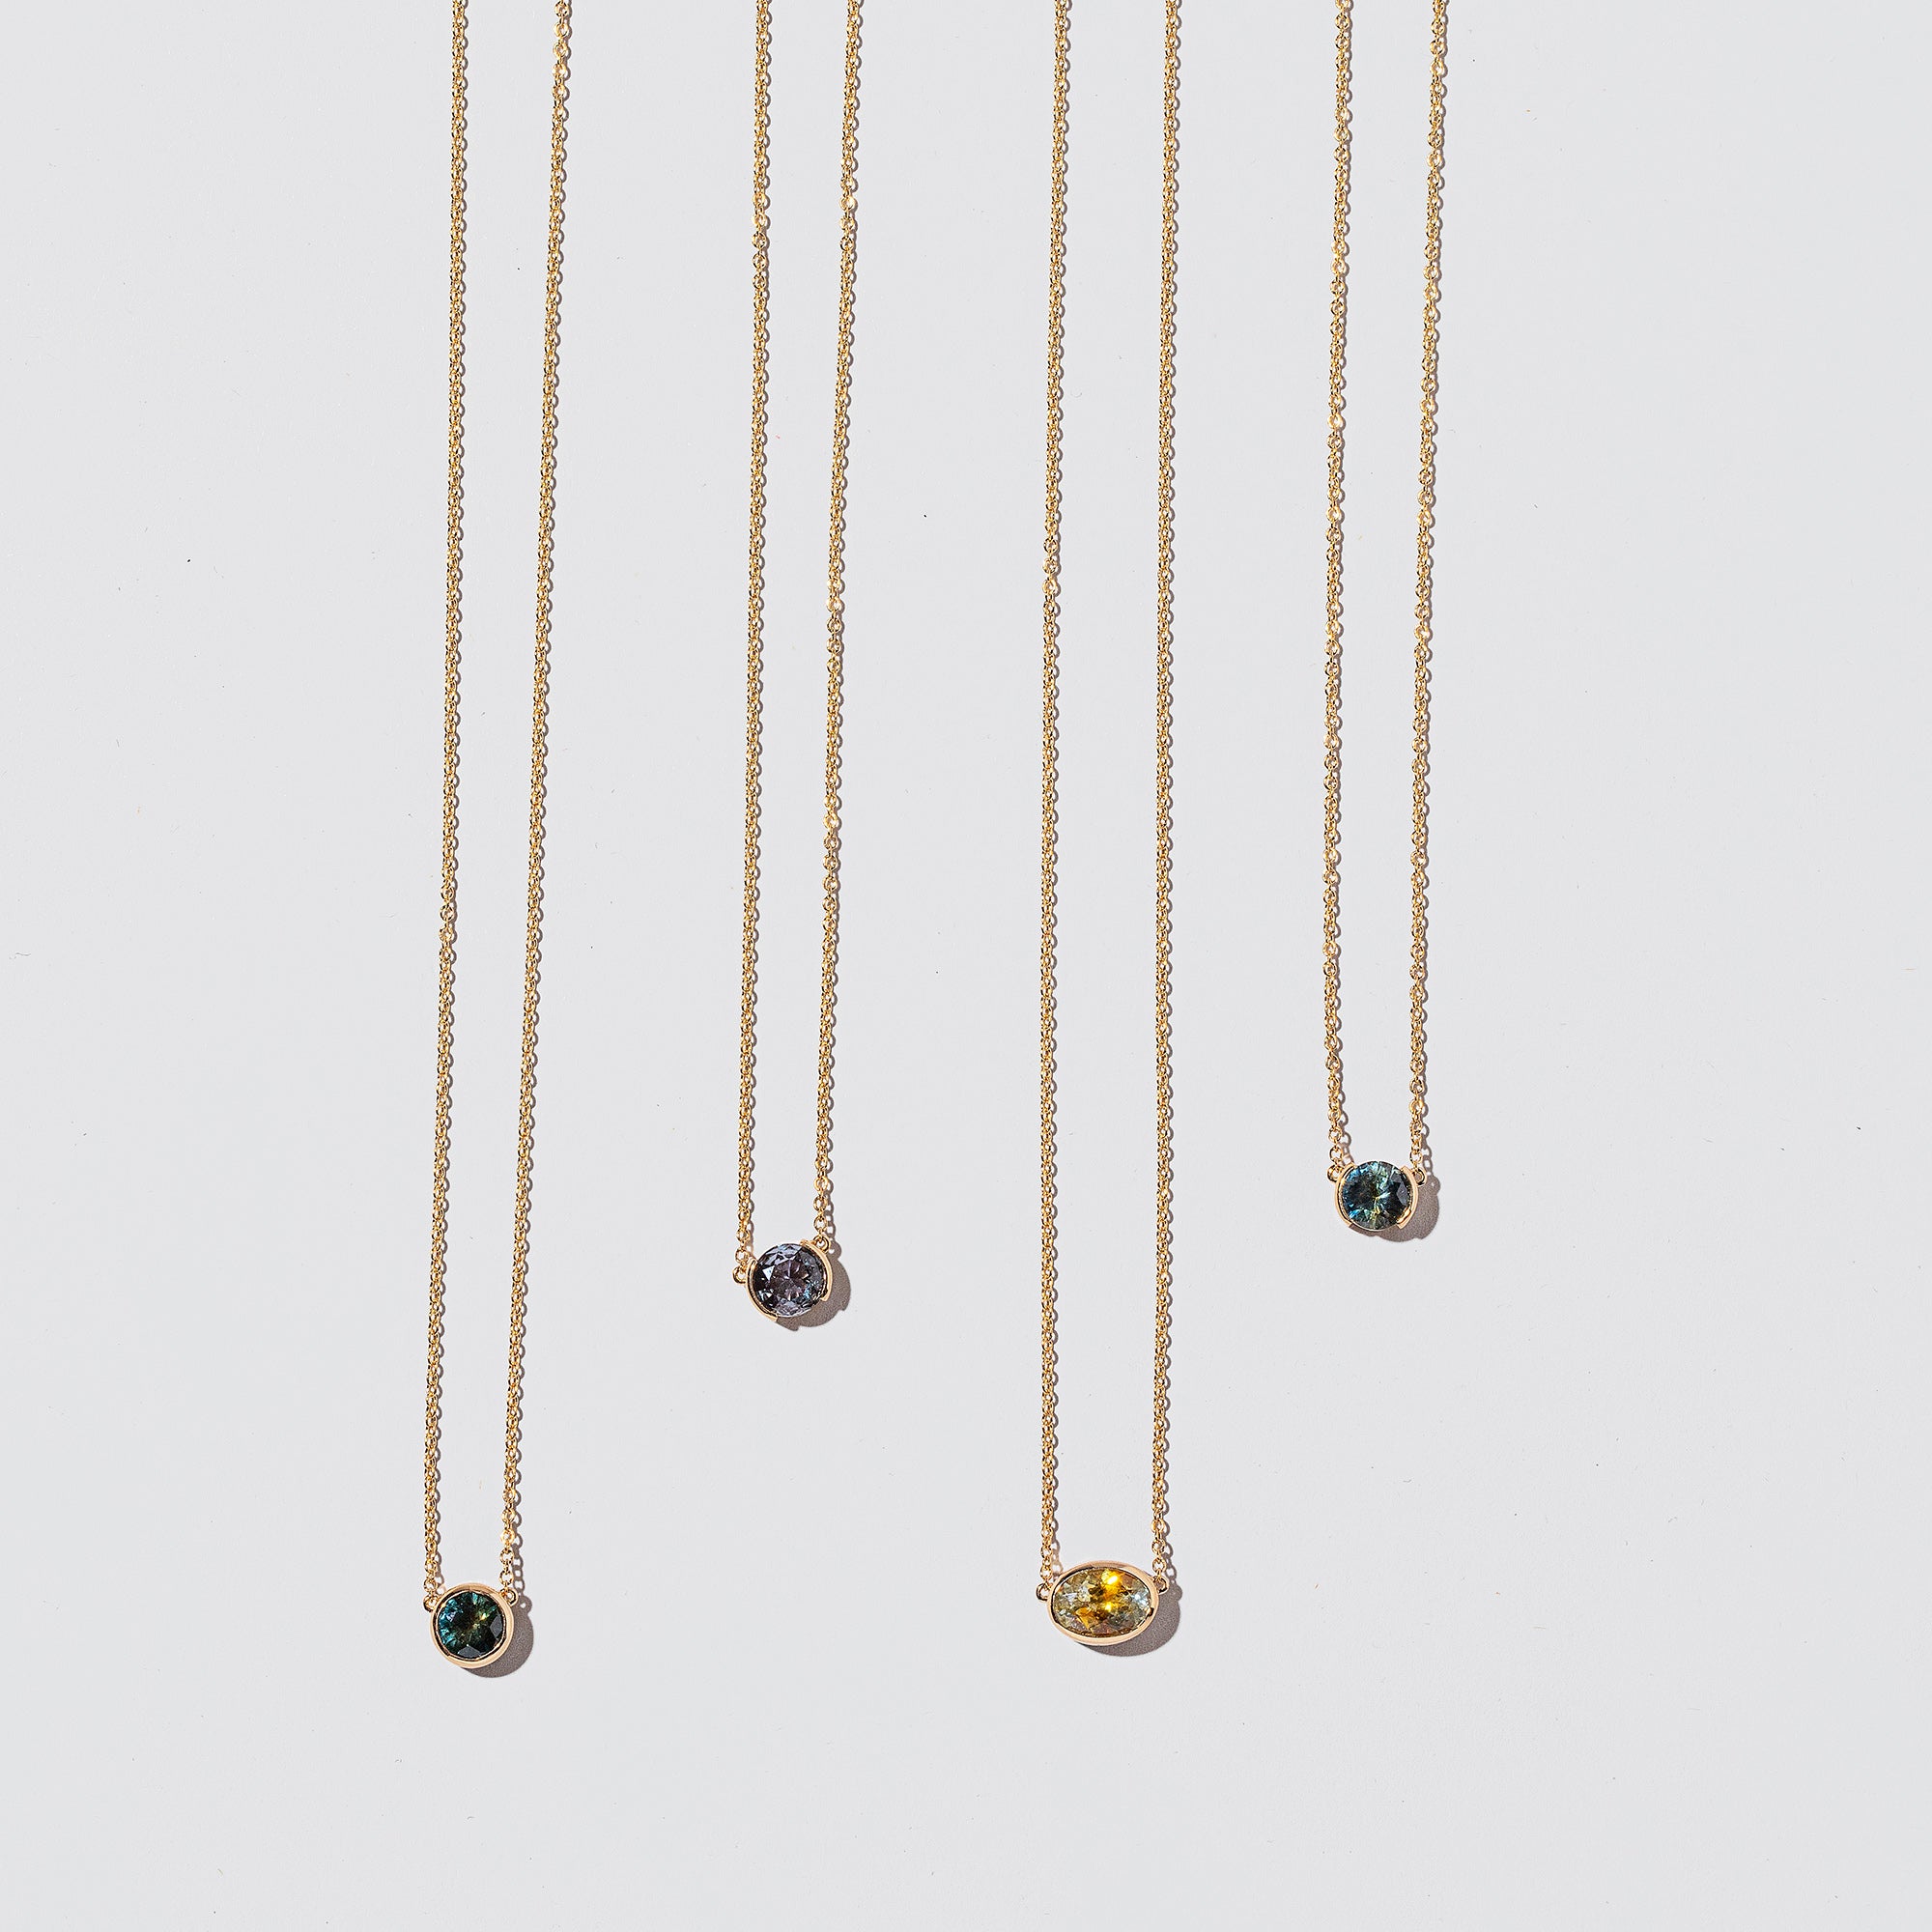 product_details::Group of Sapphire Cluster Necklaces on light color background.